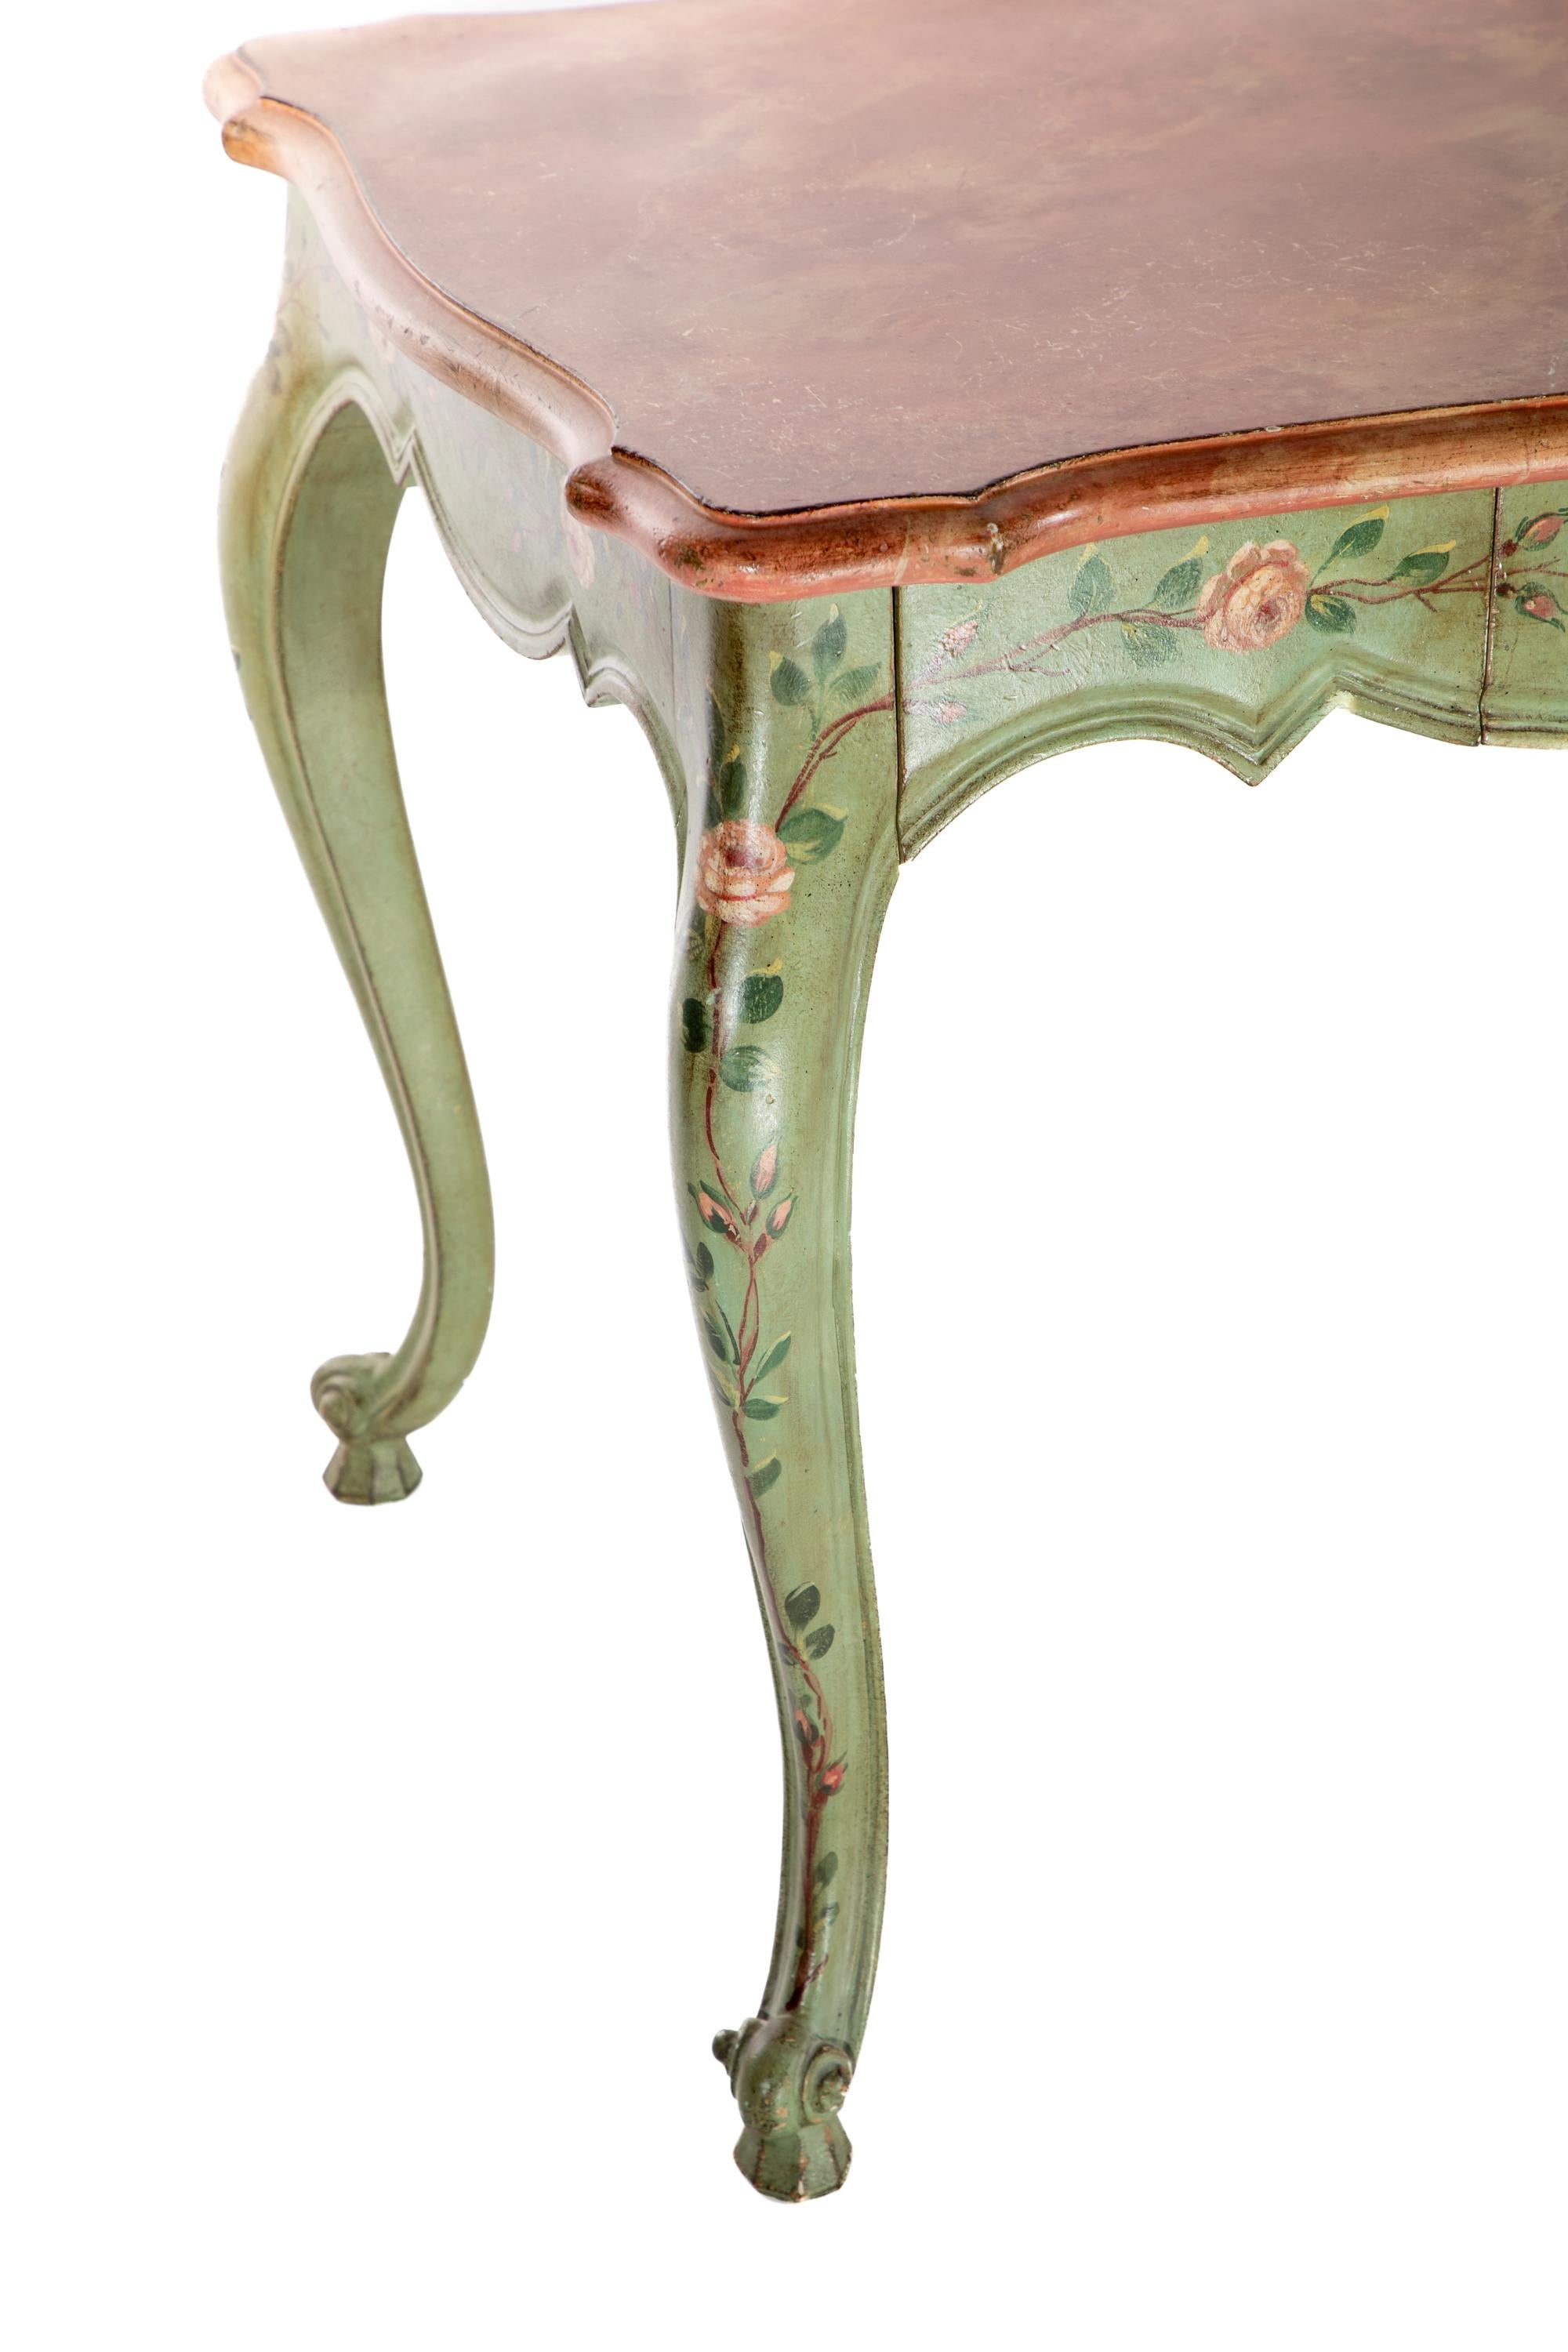 Fontevieille Writing Table by Patina
With custom finish